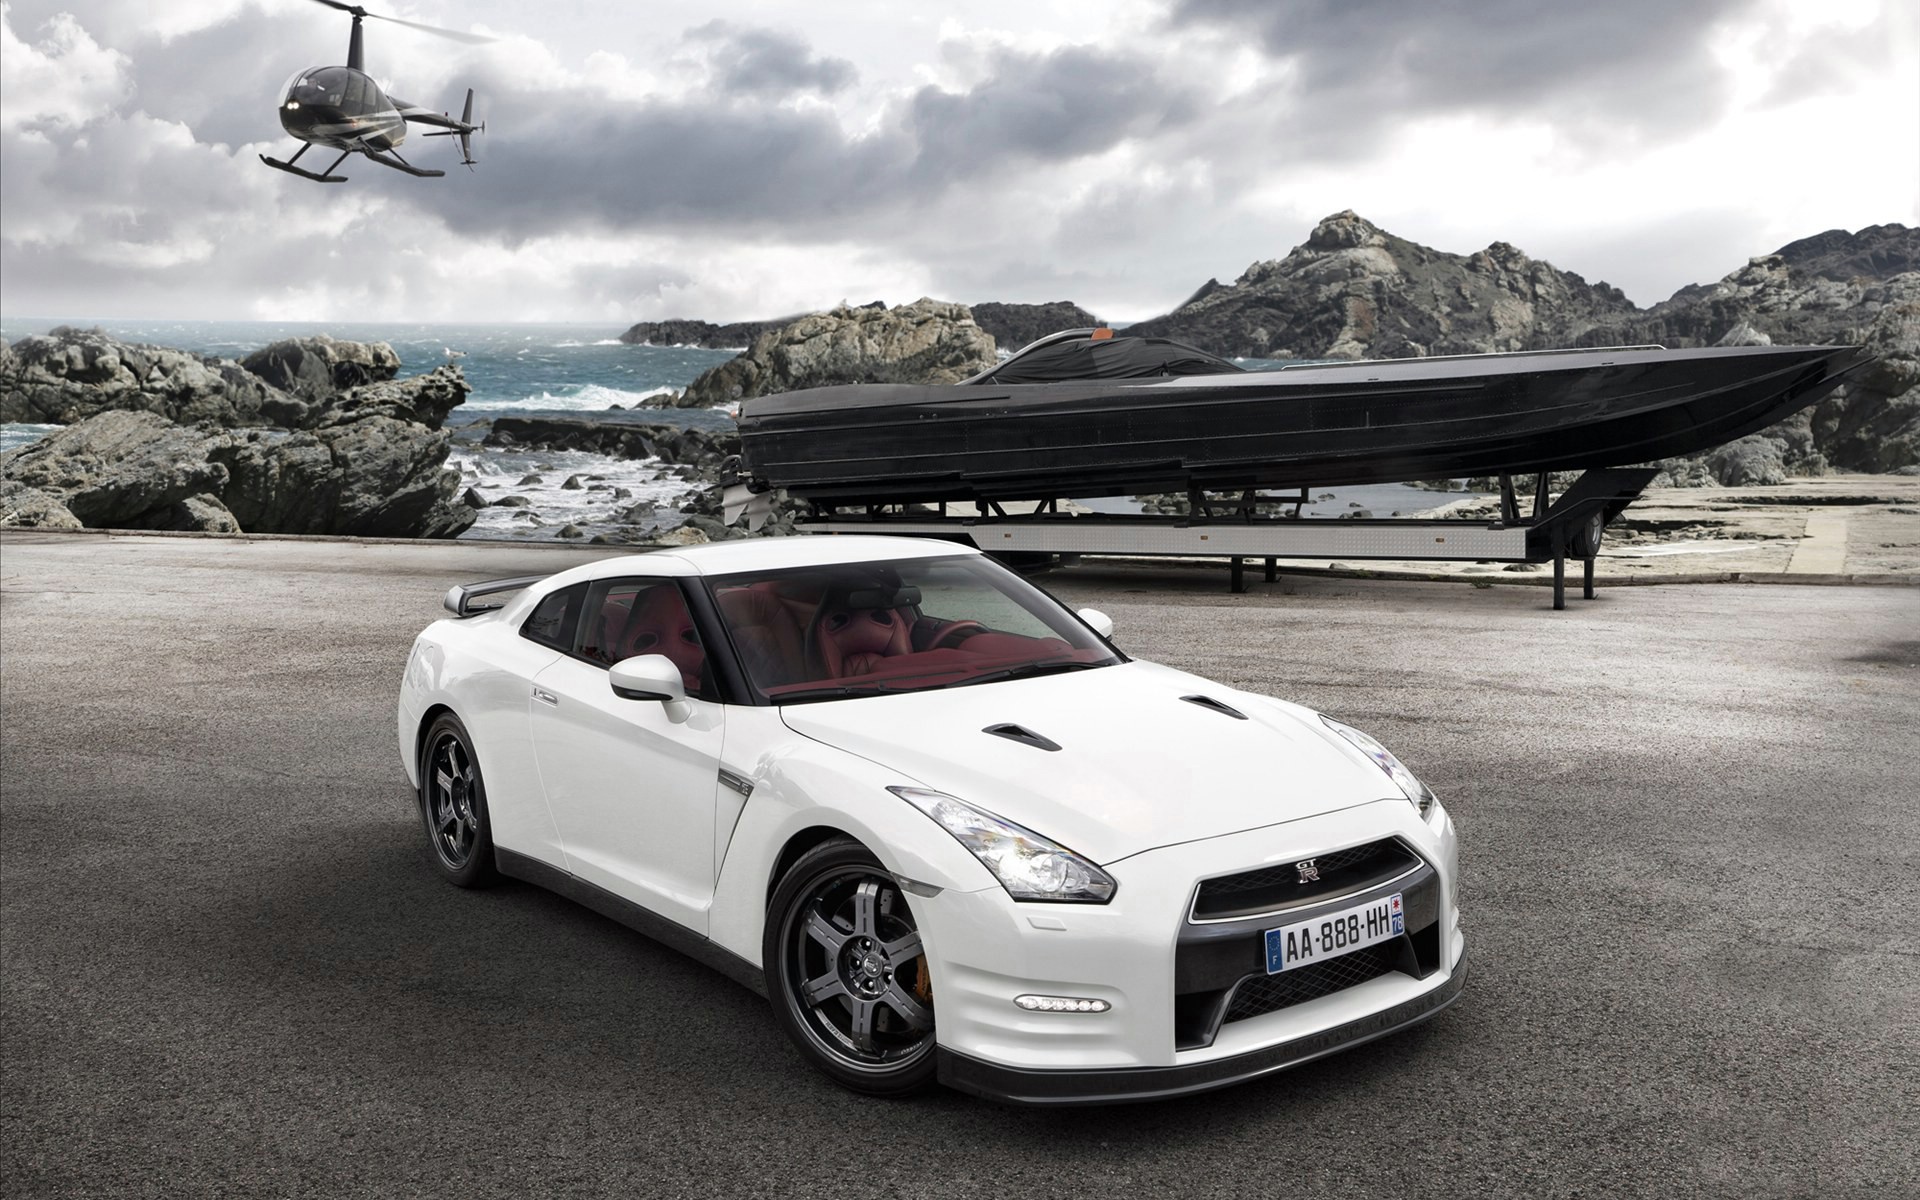 General 1920x1200 car Nissan Nissan GT-R helicopters boat vehicle white cars